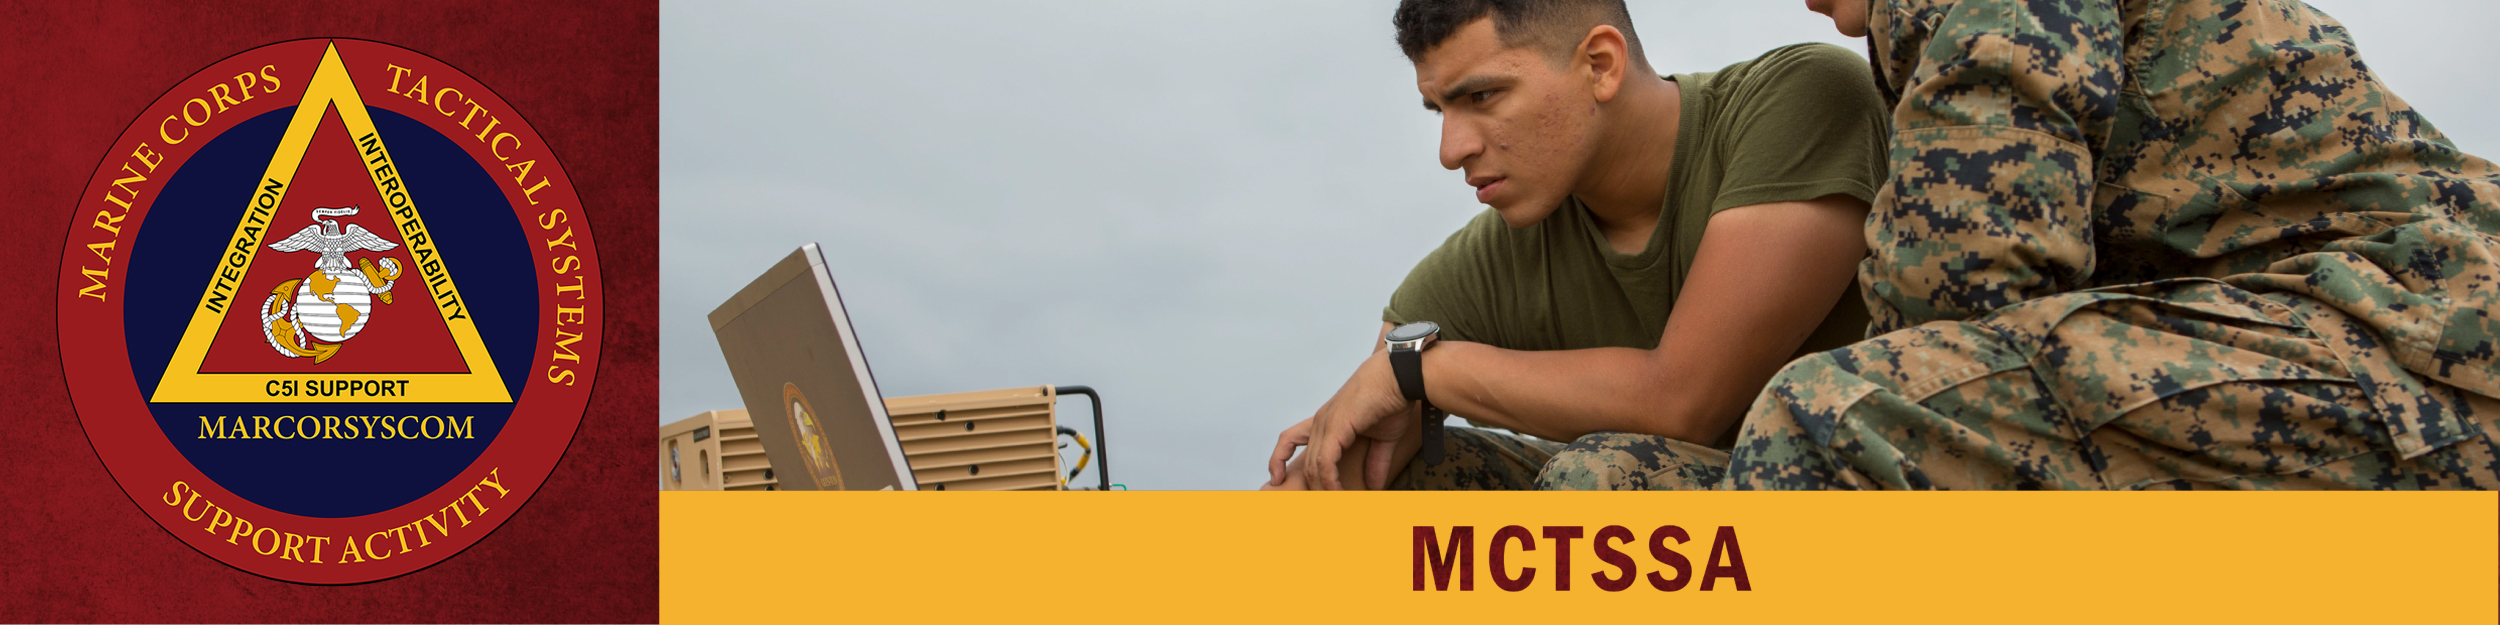 Graphic with seal for MCTSSA, includes photo of Marines, text below reads MCTSSA